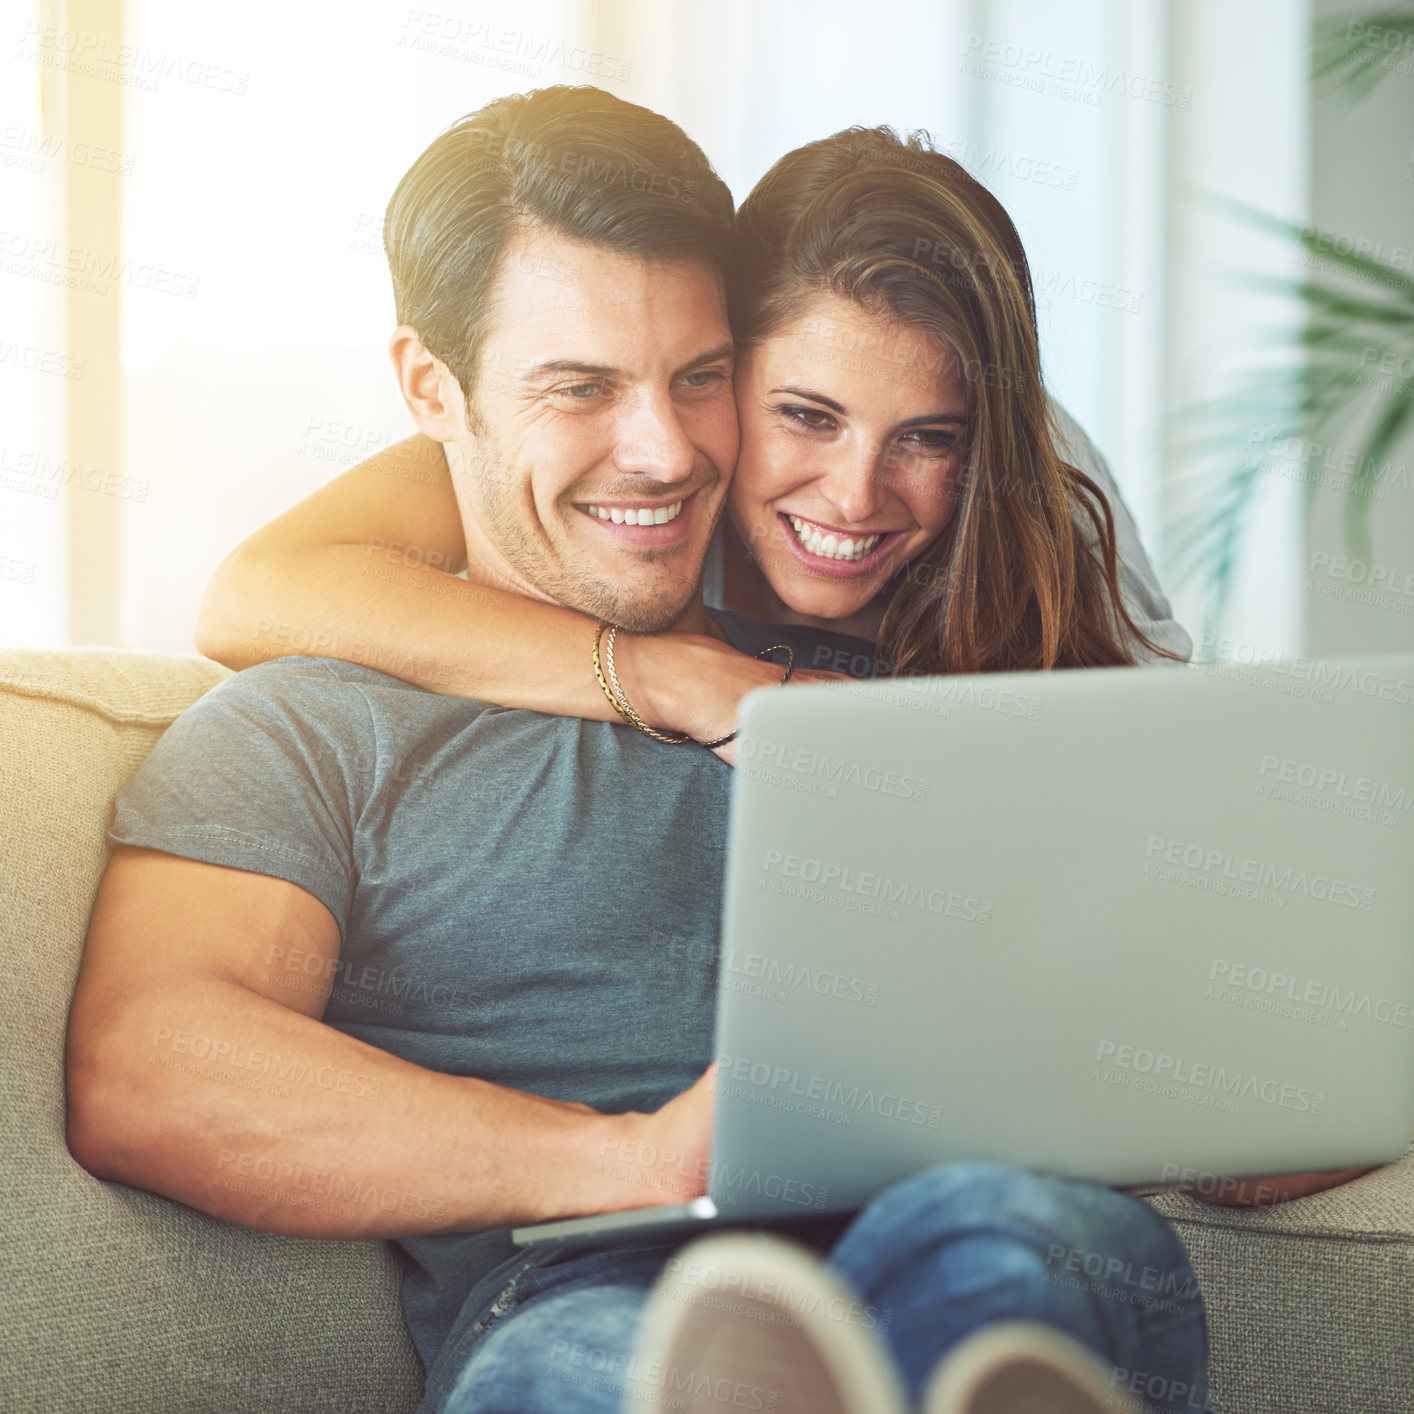 Buy stock photo Shot of an affectionate young couple using a laptop at home